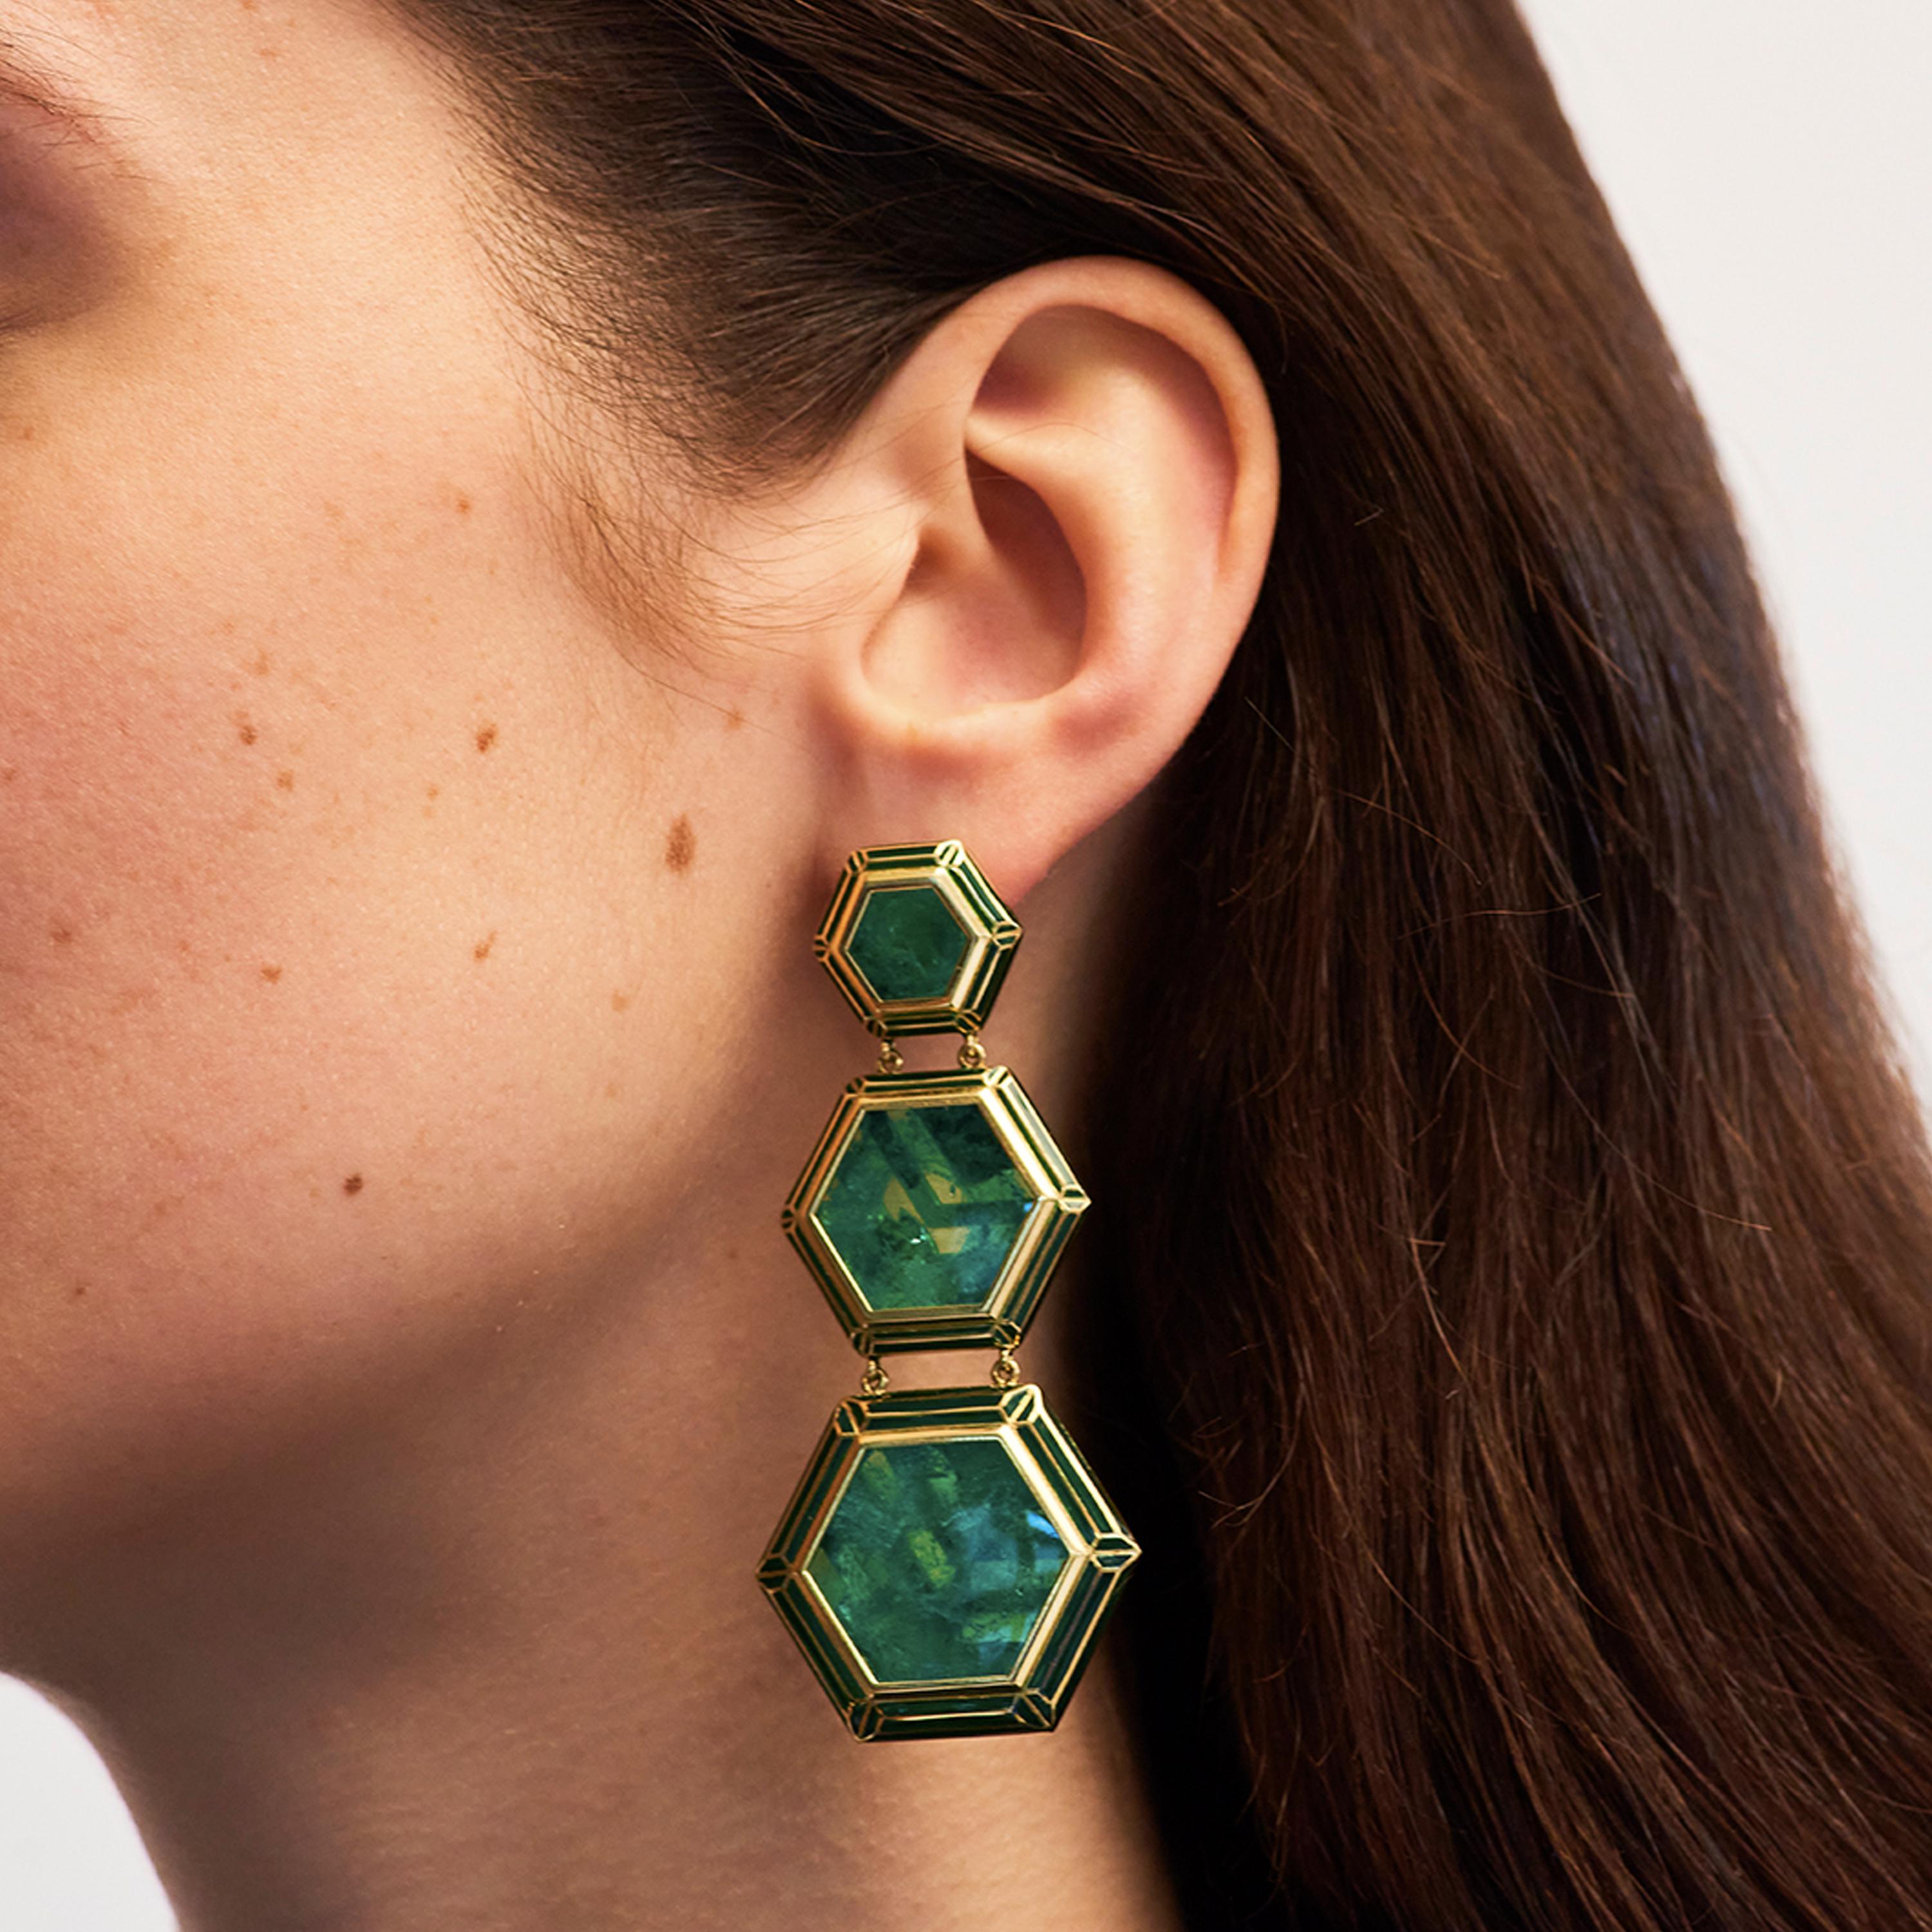 Alice Cicolini's vibrant Muzo Emerald Jaipur Bouganvillea Earrings are made in 18k yellow gold. One-of-a-kind, these jewels are hand painted with lacquer enamel by London-based master craftsmen Alan O’Grady, Stanislav Reymer. They are set with Muzo